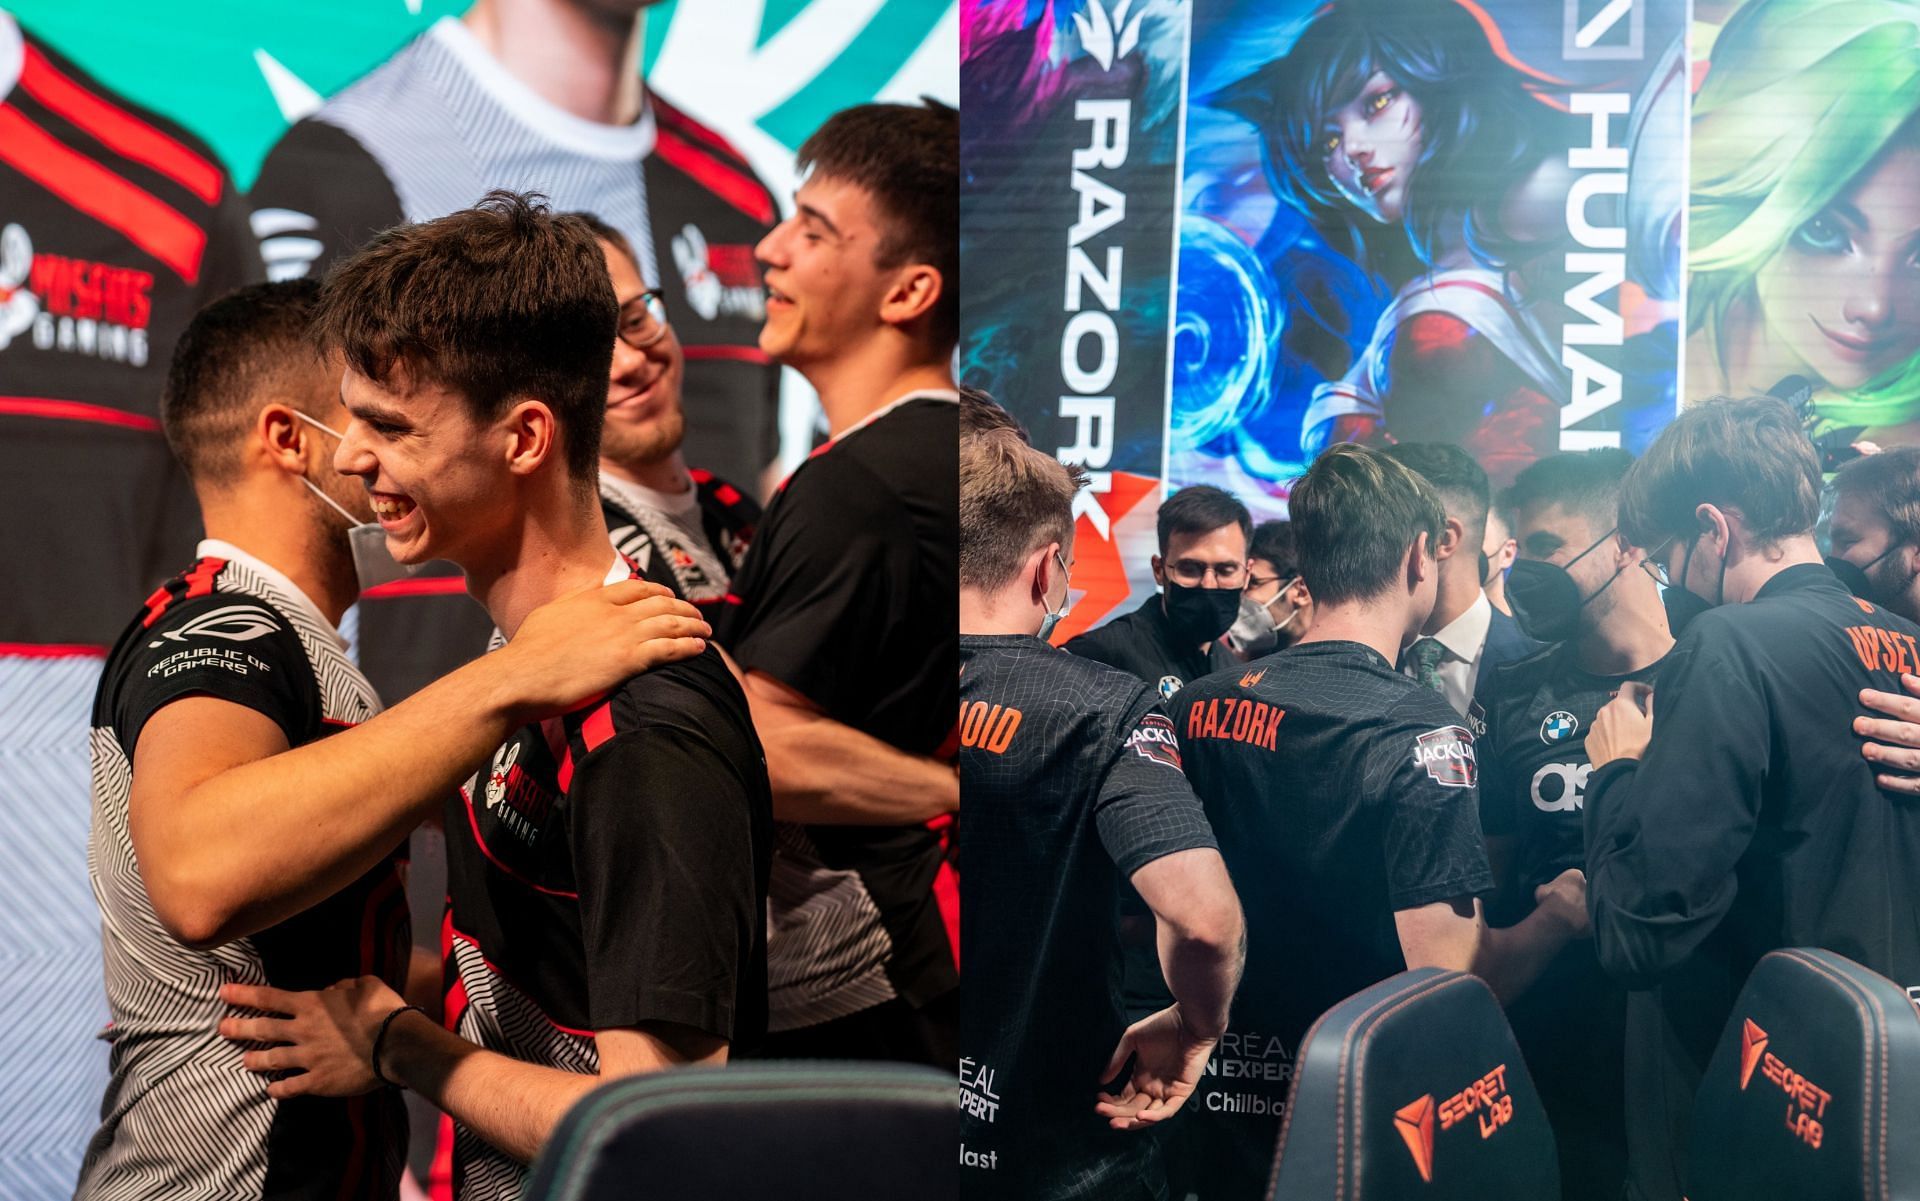 Misfits Gaming vs Fnatic is set to be a battle for survival and personal prestige (Image via Riot Games)